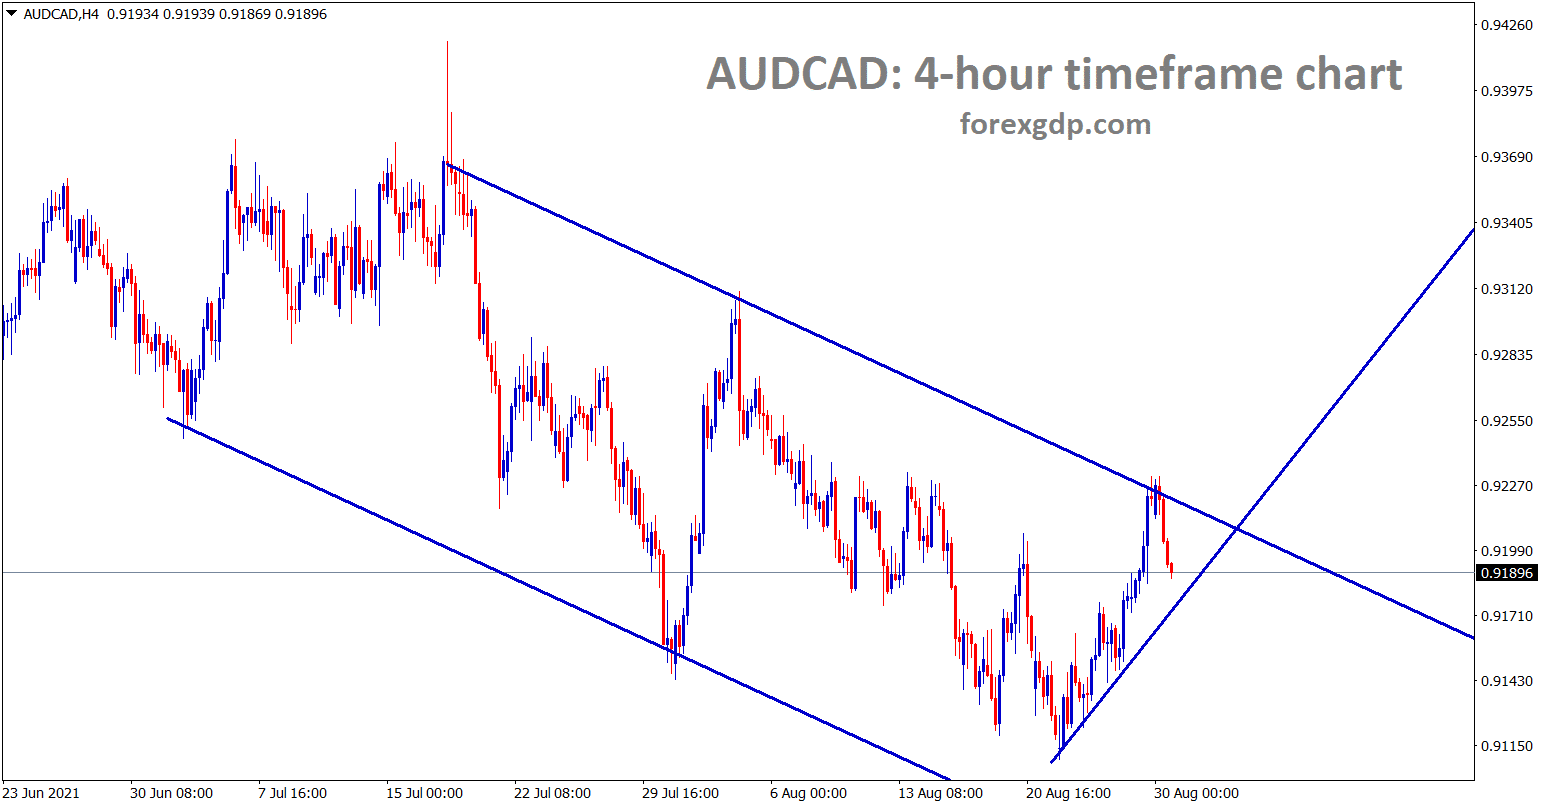 AUDCAD is making some correction from the lower high of the desending channel